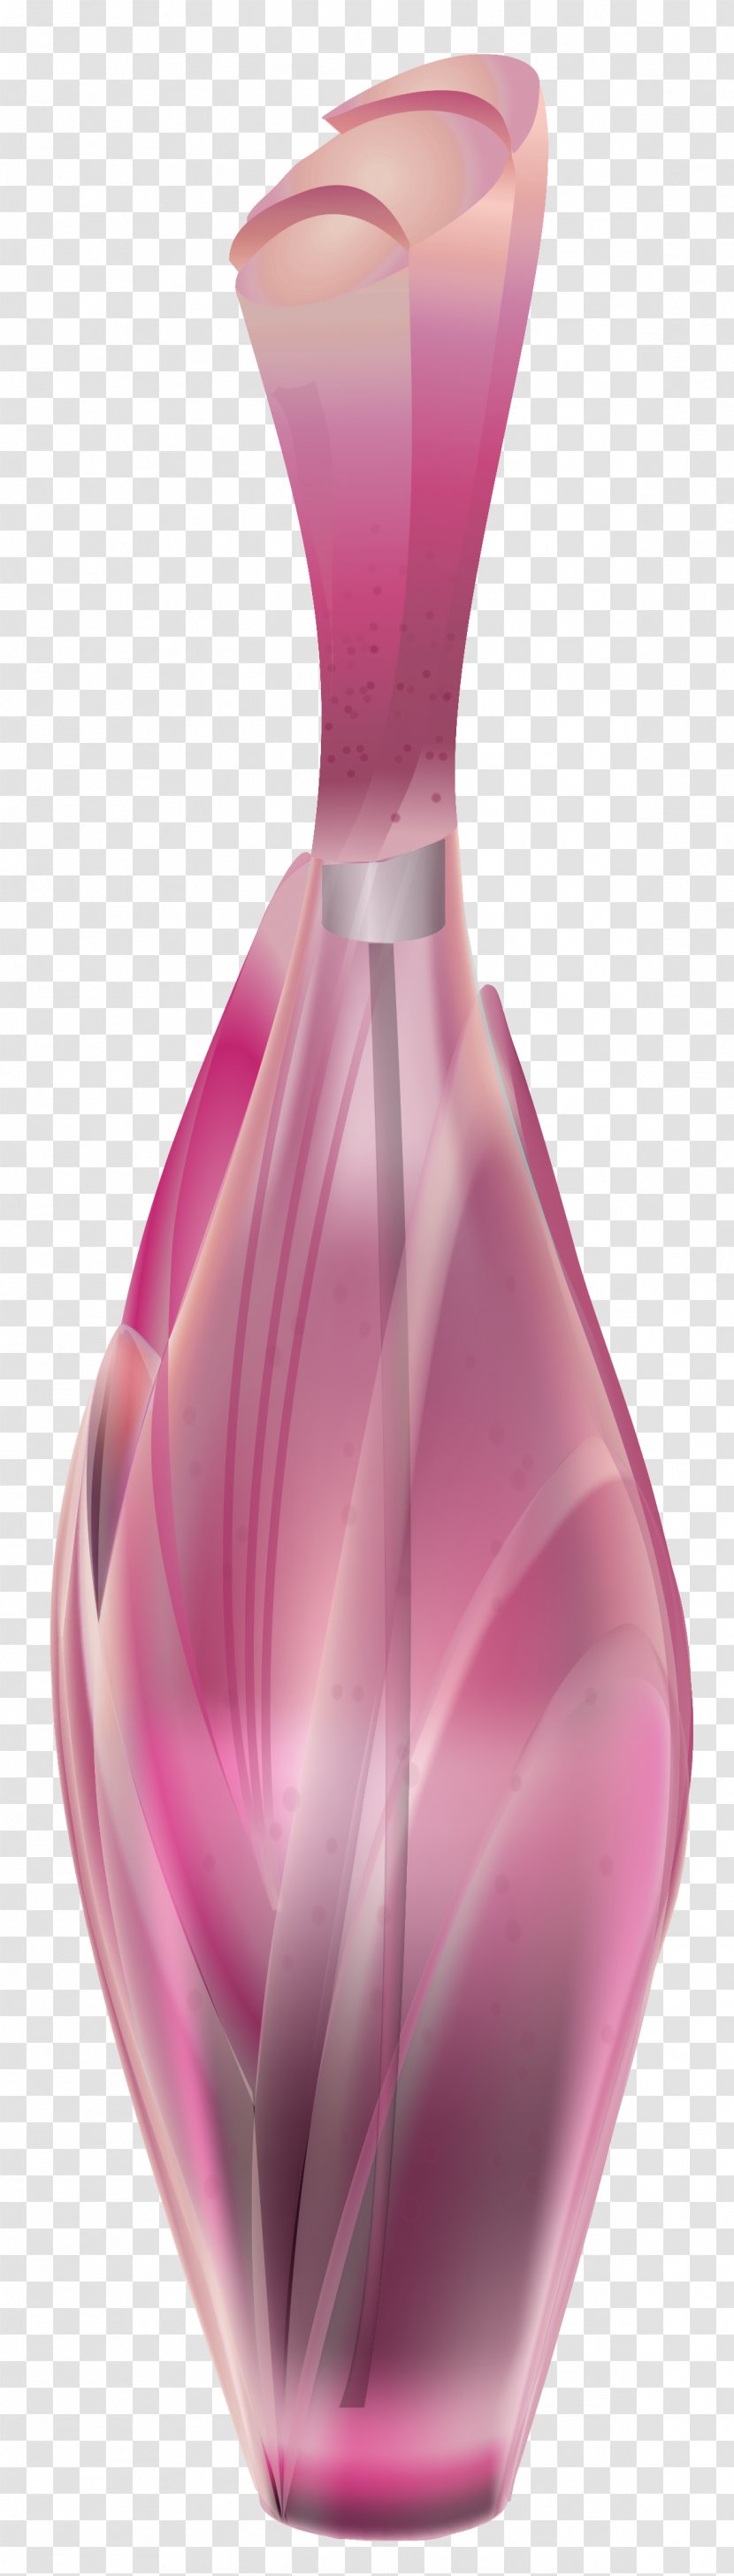 Perfume Bottle Chanel No. 5 - Product - Clipart Picture Transparent PNG